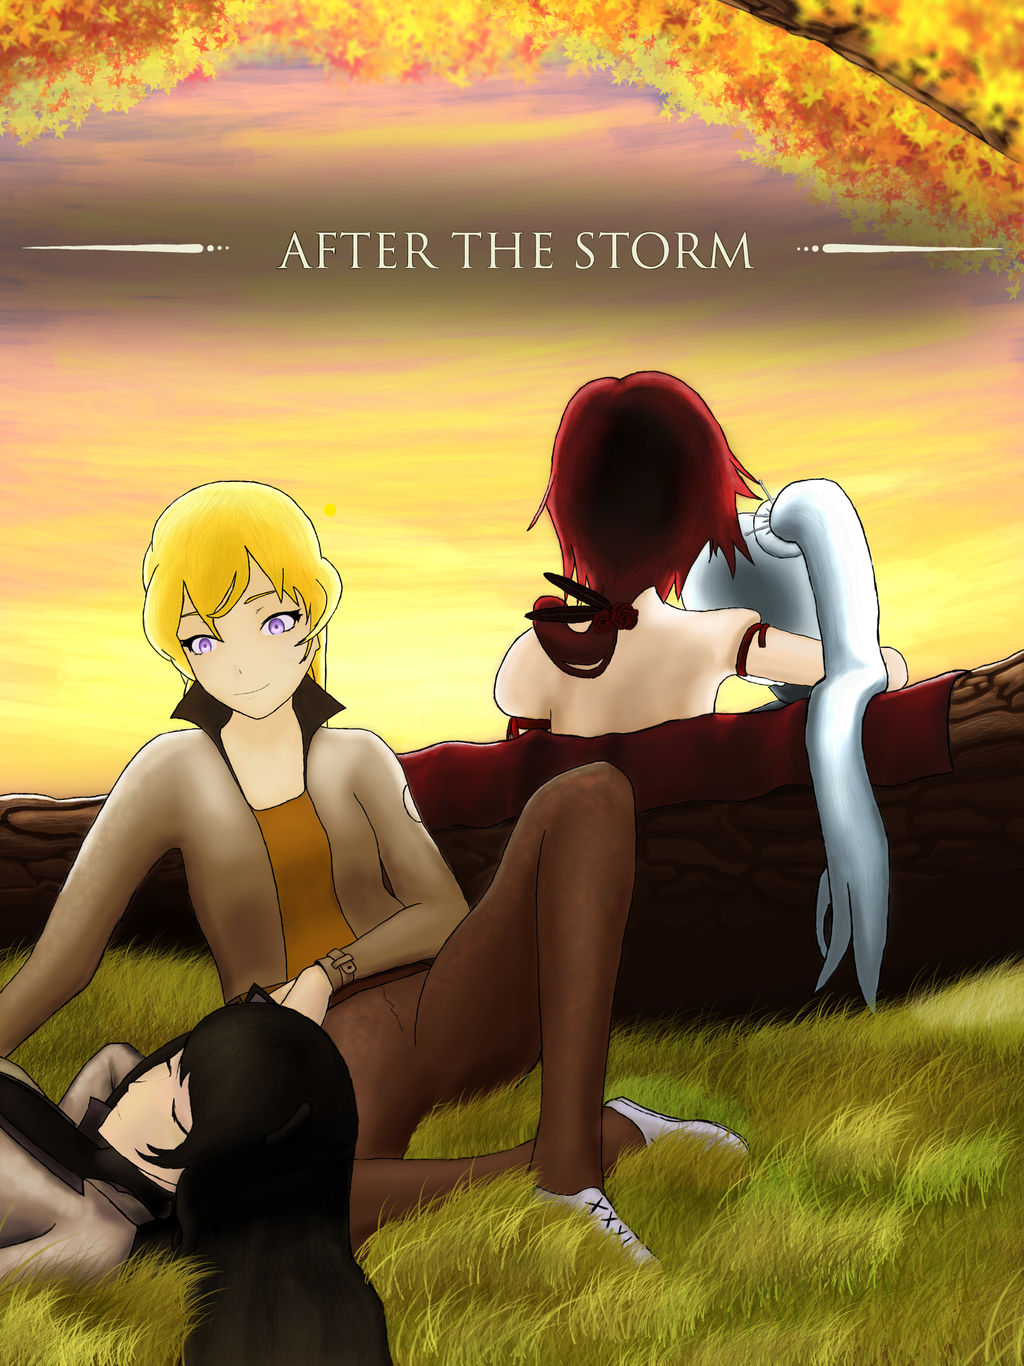 RWBY: After the Storm - Cover